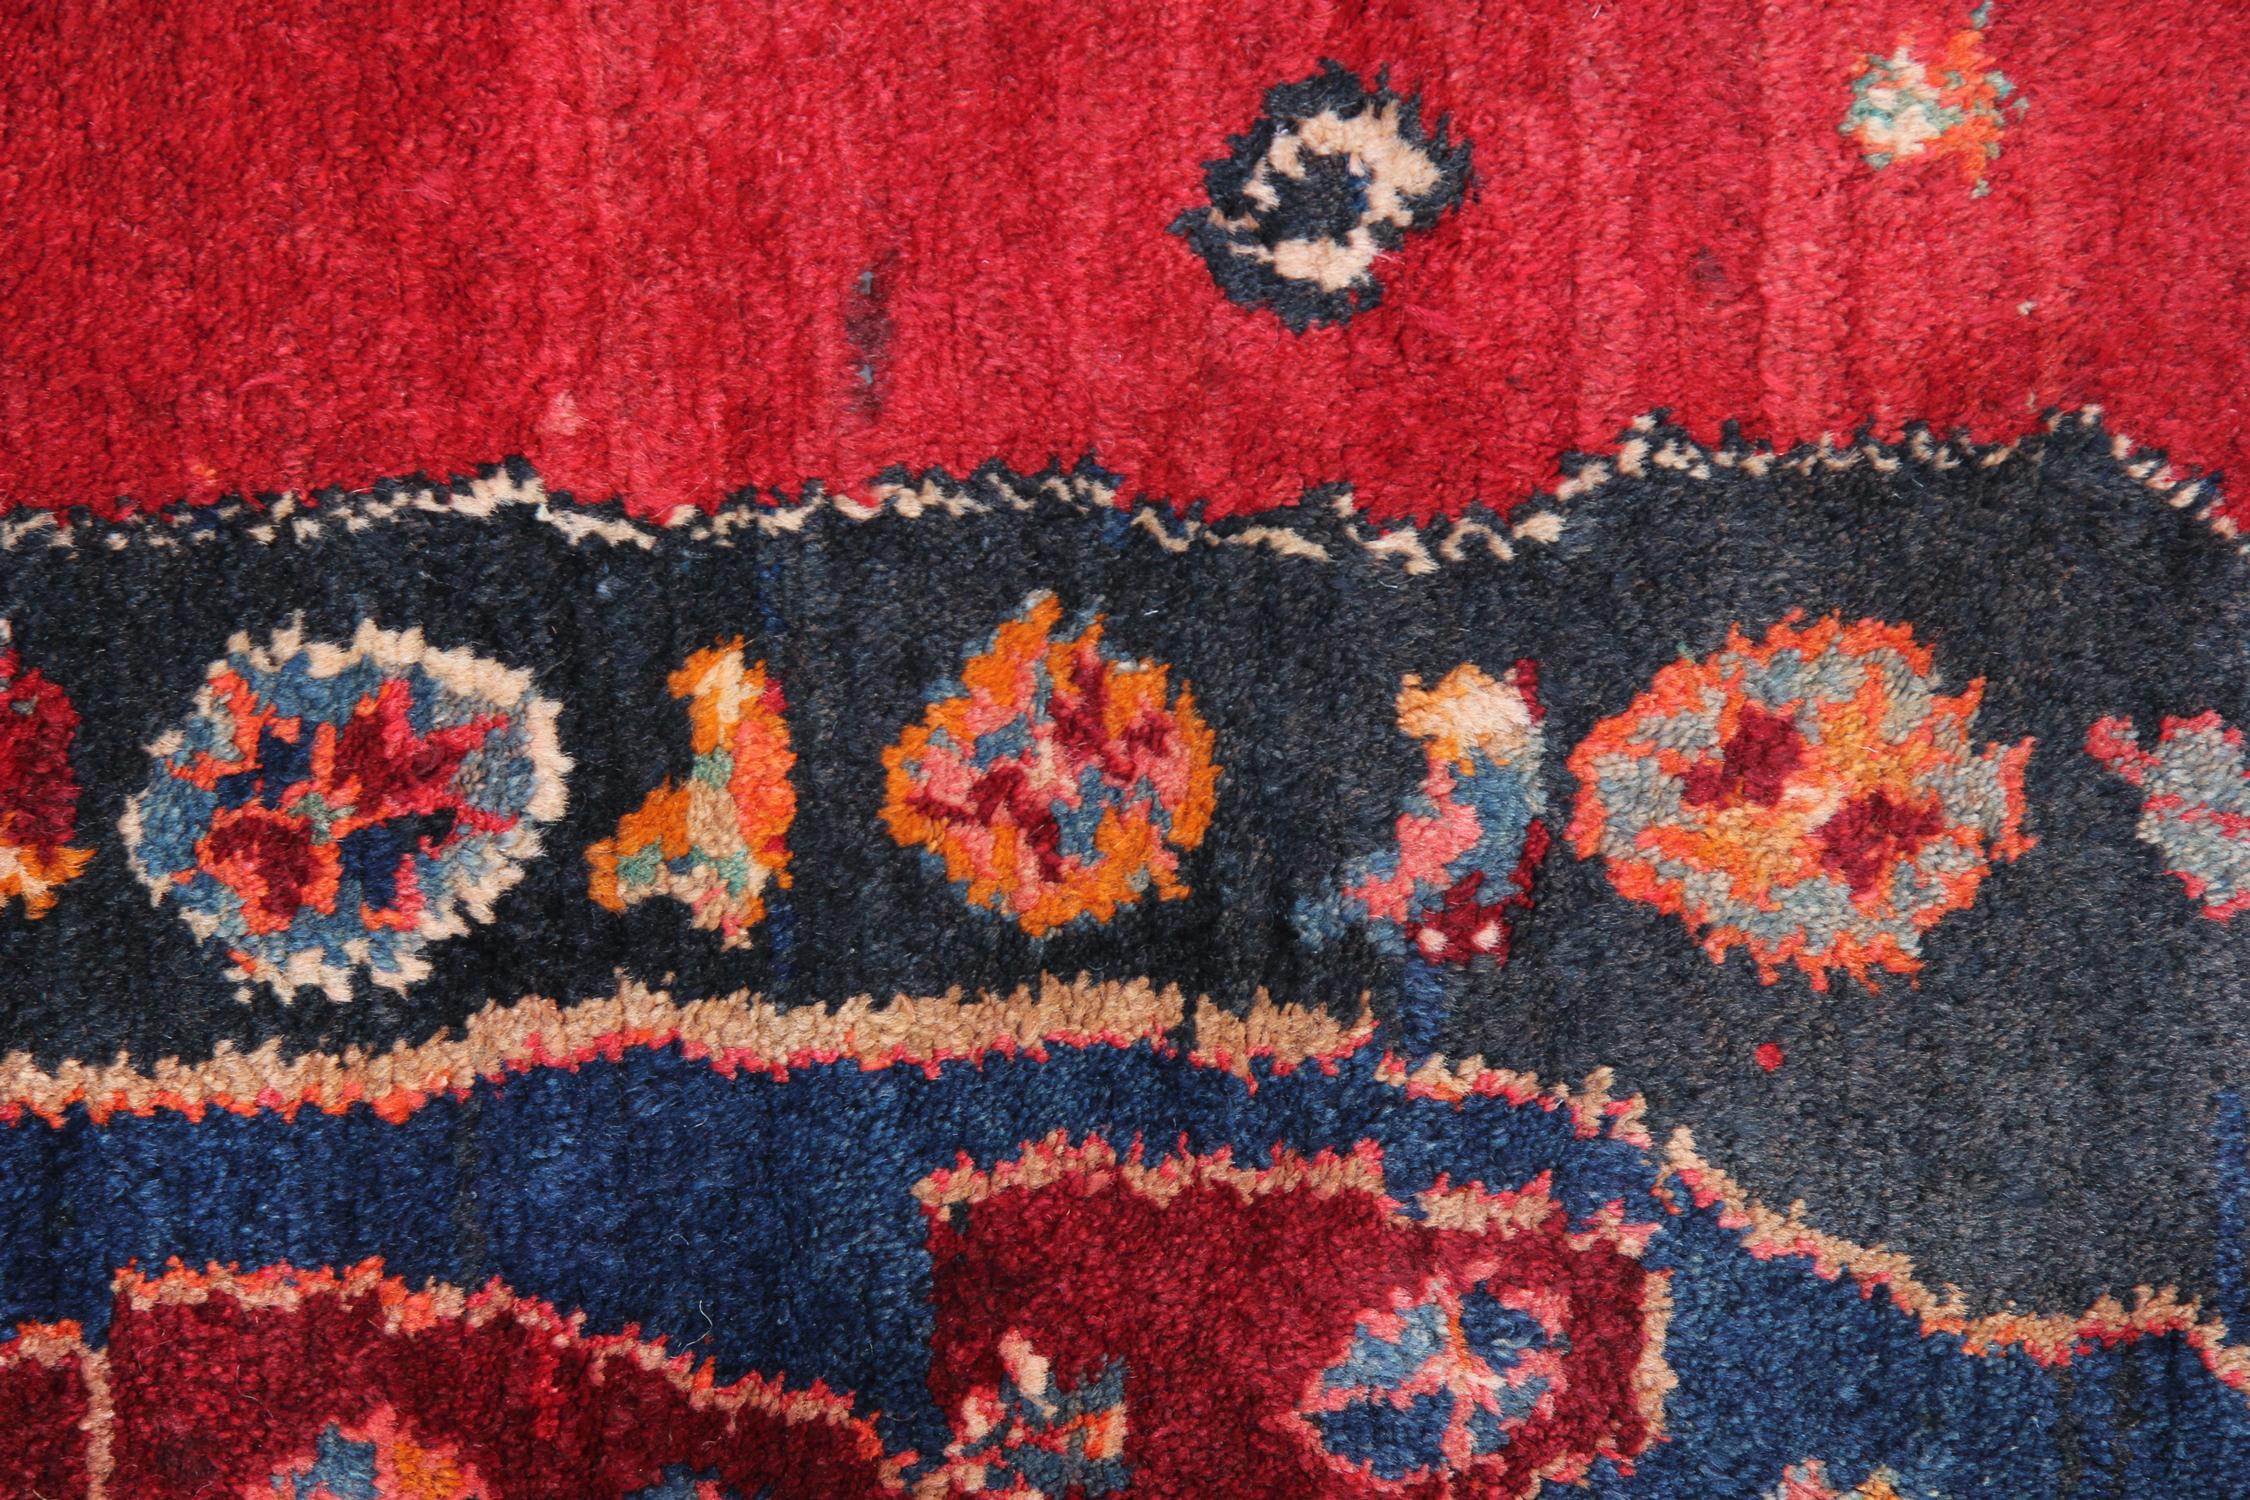 Are you looking for a vintage piece to uplift your space? Then Look no further! Both the colour, design and construction of this fine wool rug make it the perfect accent piece. This piece features a rich red all over tribal design woven on a